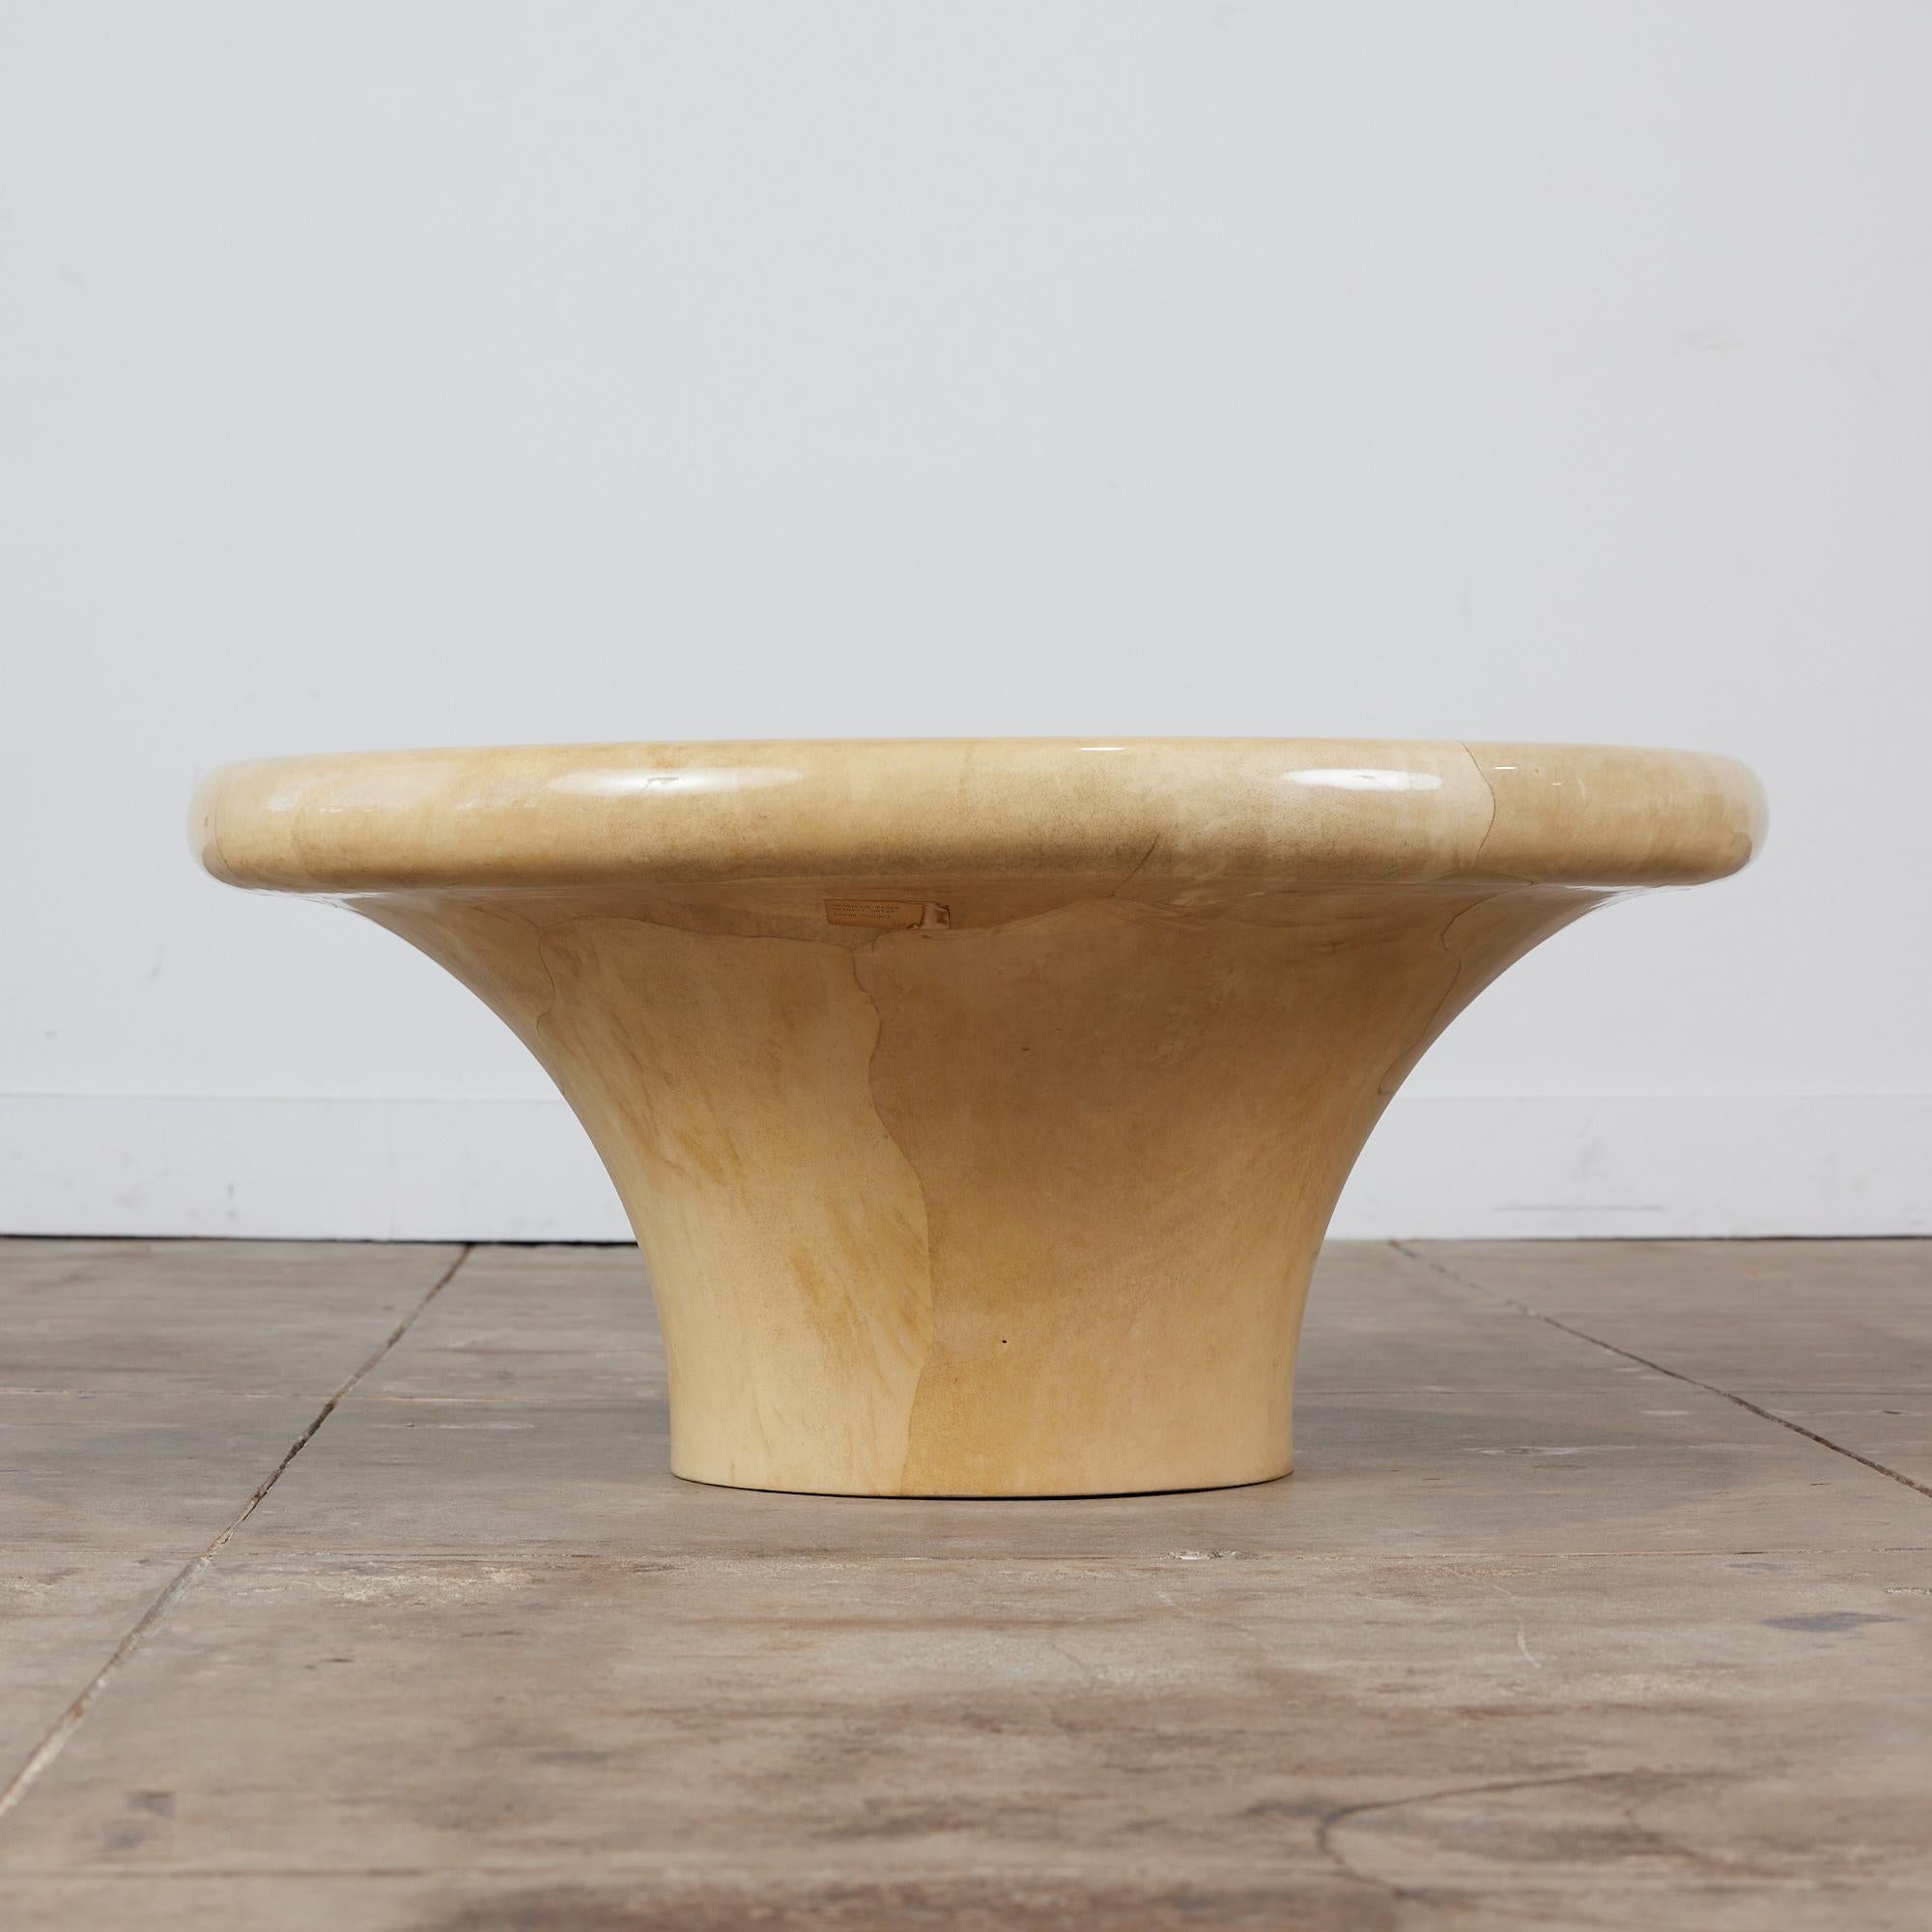 A postmodern mushroom coffee table by Karl Springer, c.1980s, USA. This coffee table features a lacquered goatskin with a smooth finish and soft rounded edges. The pedestal table is a natural beige color throughout.

Dimensions: 36